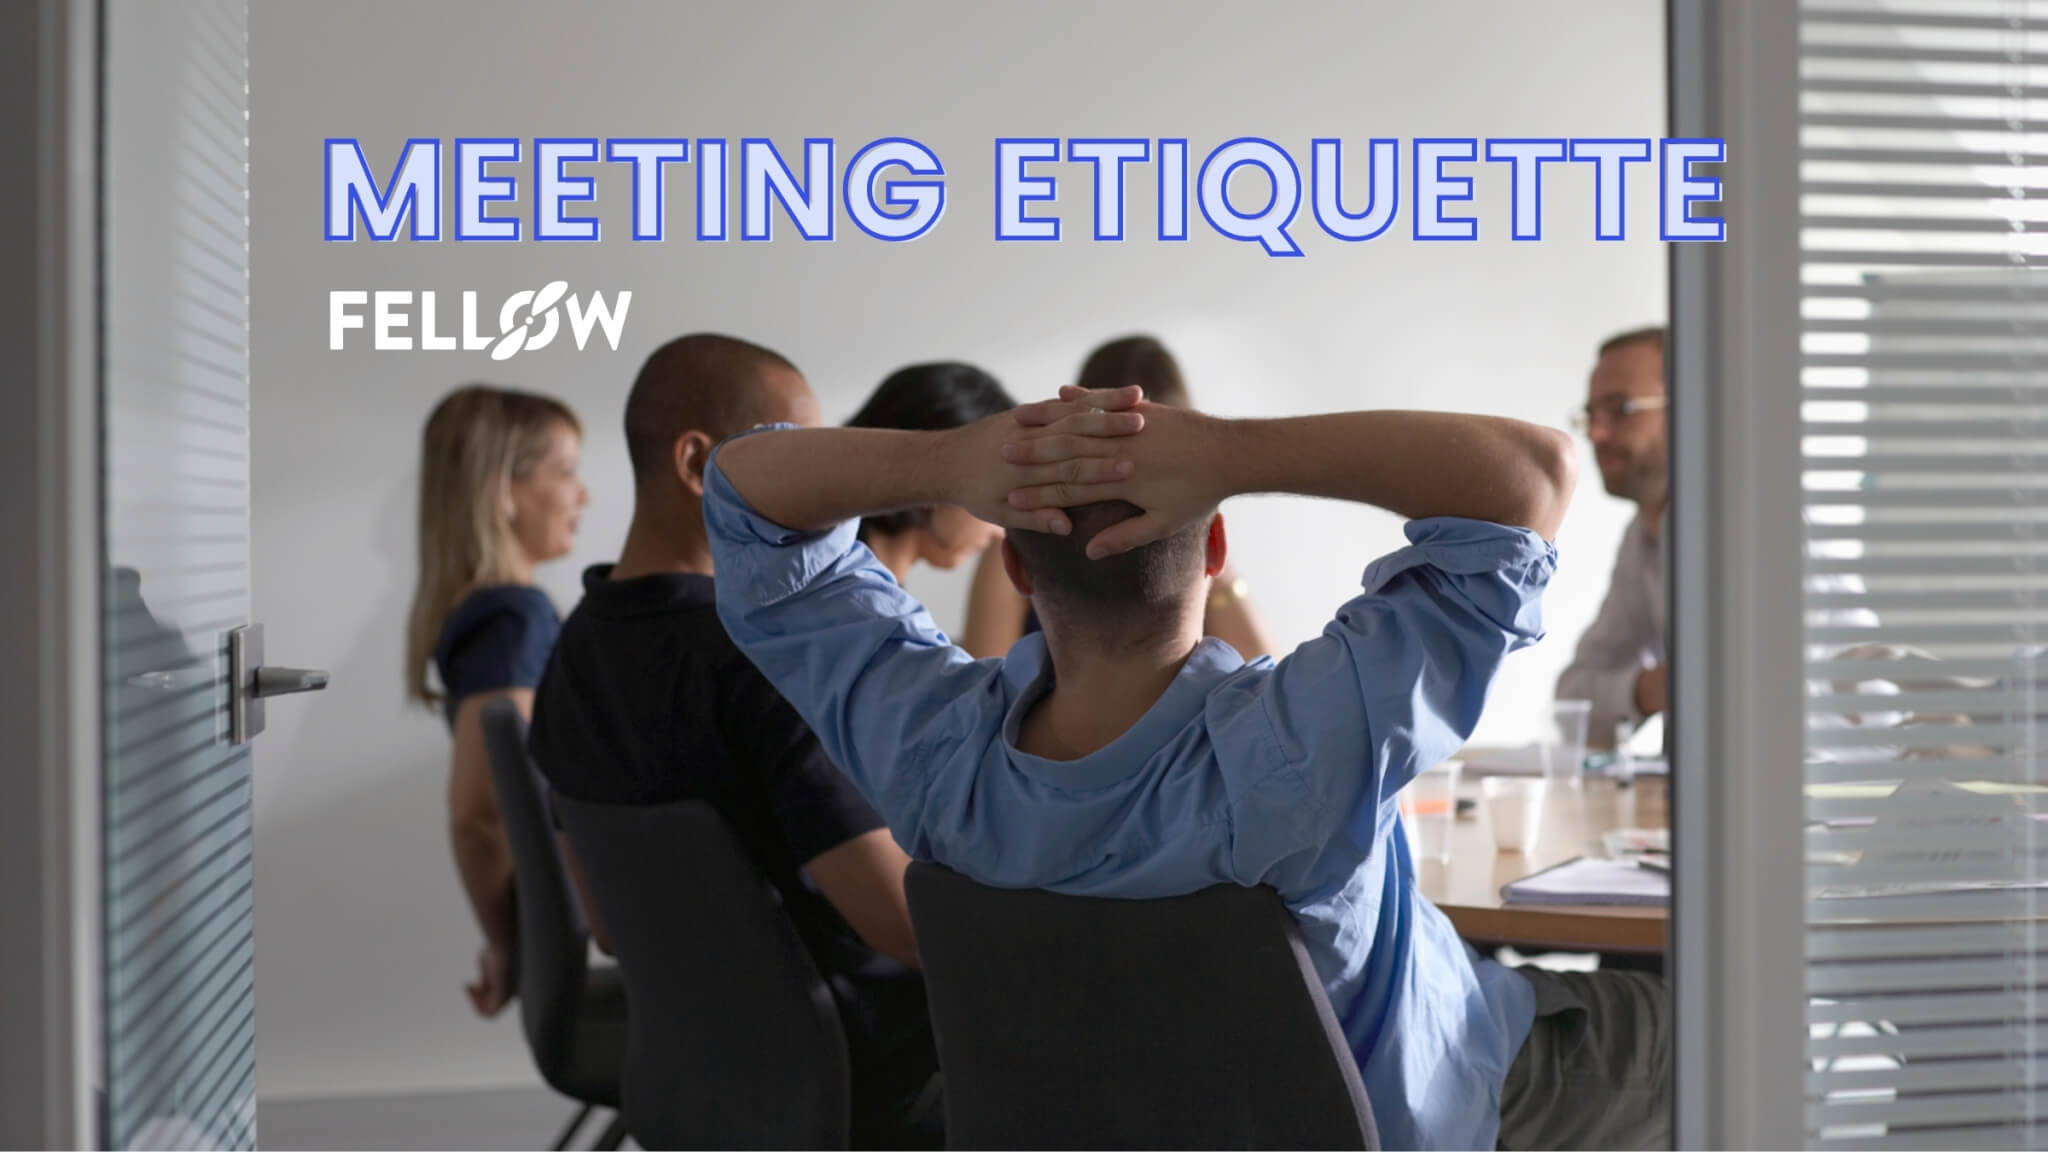 Workplace Etiquette Rules - 8 Tips Every Professional Should Know